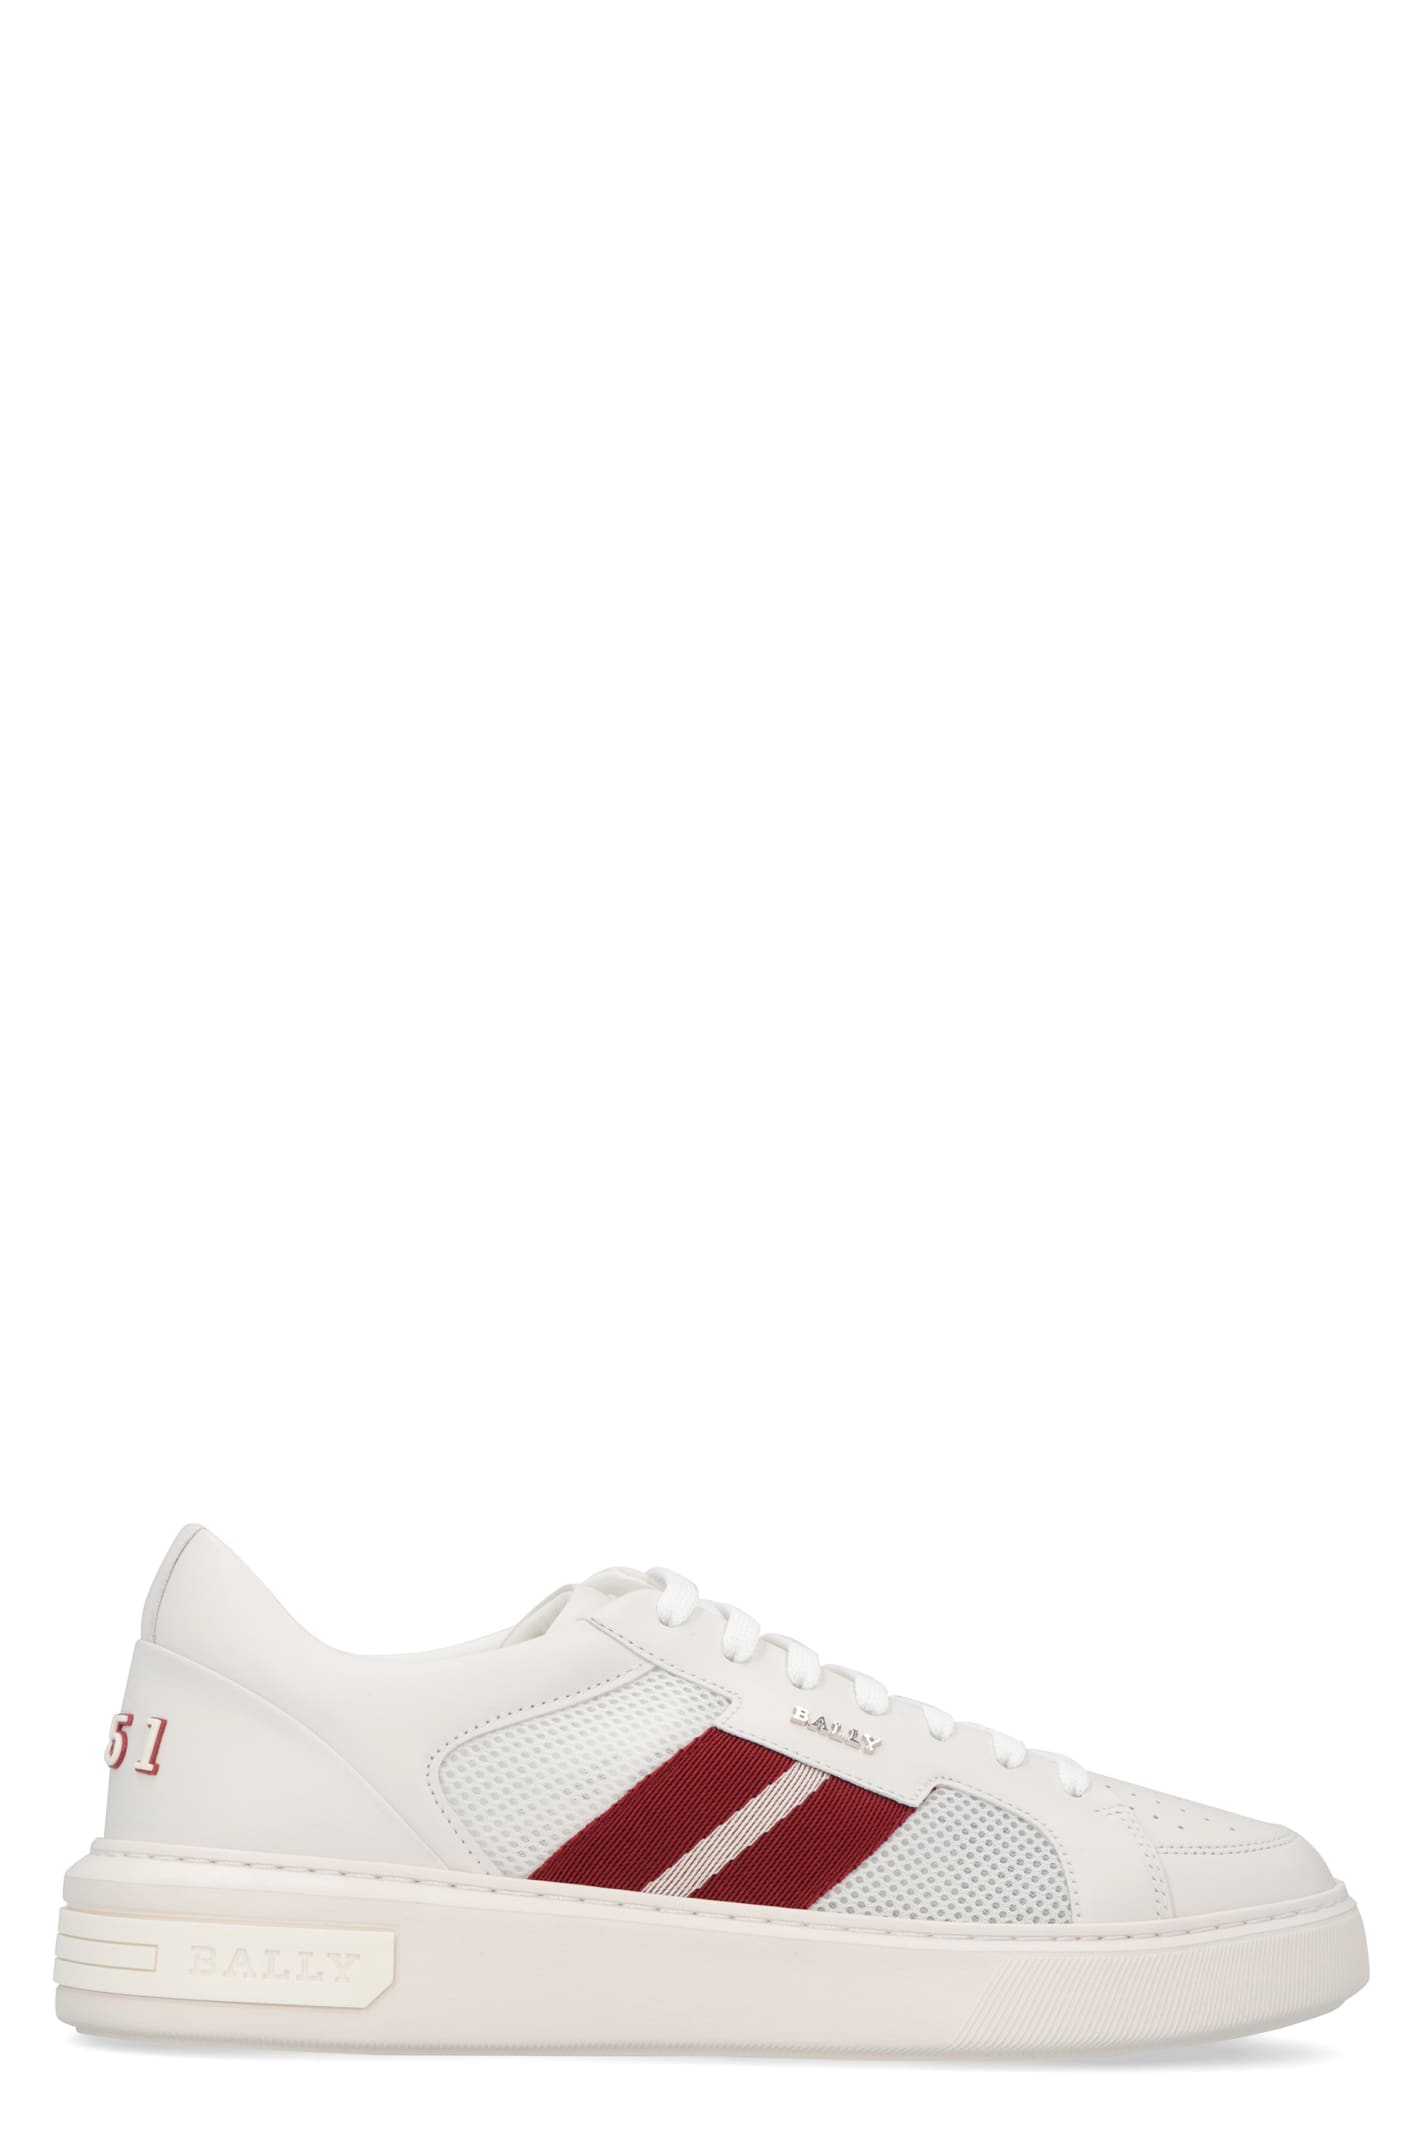 Bally Melys-t Leather And Fabric Low-top Sneakers